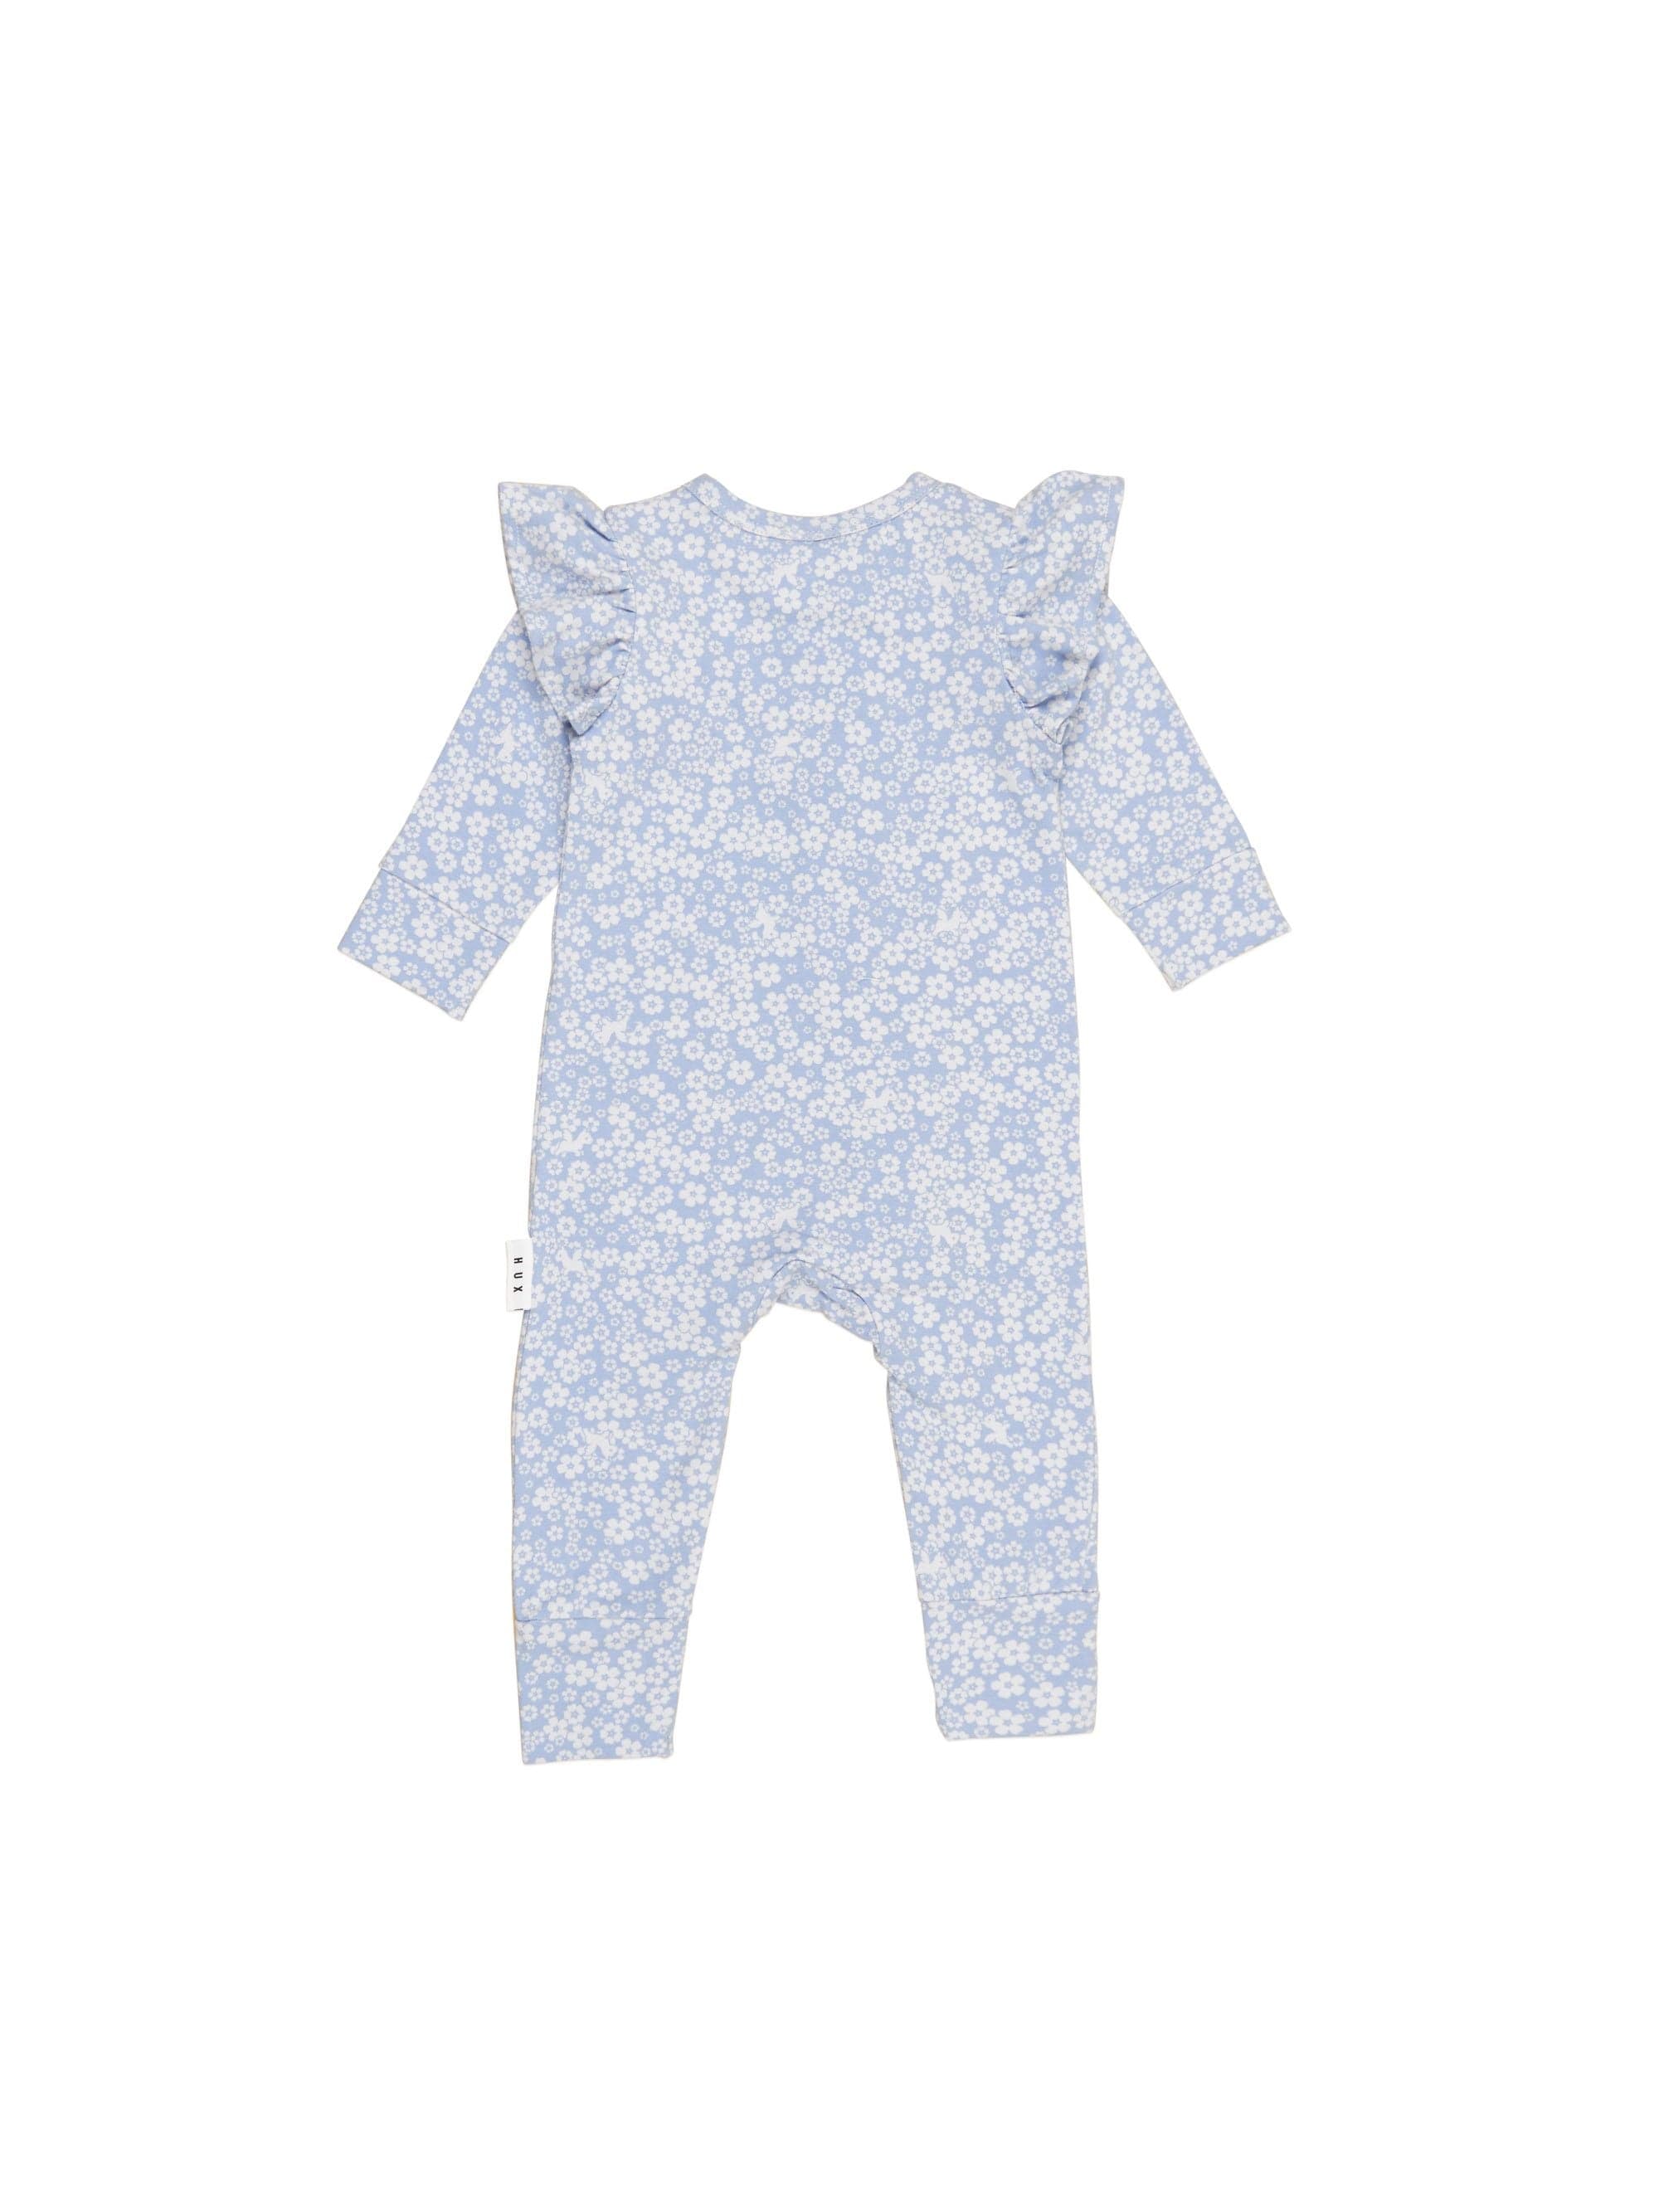 Huxbaby Girls All In One Unicorn Surprise Frill Romper